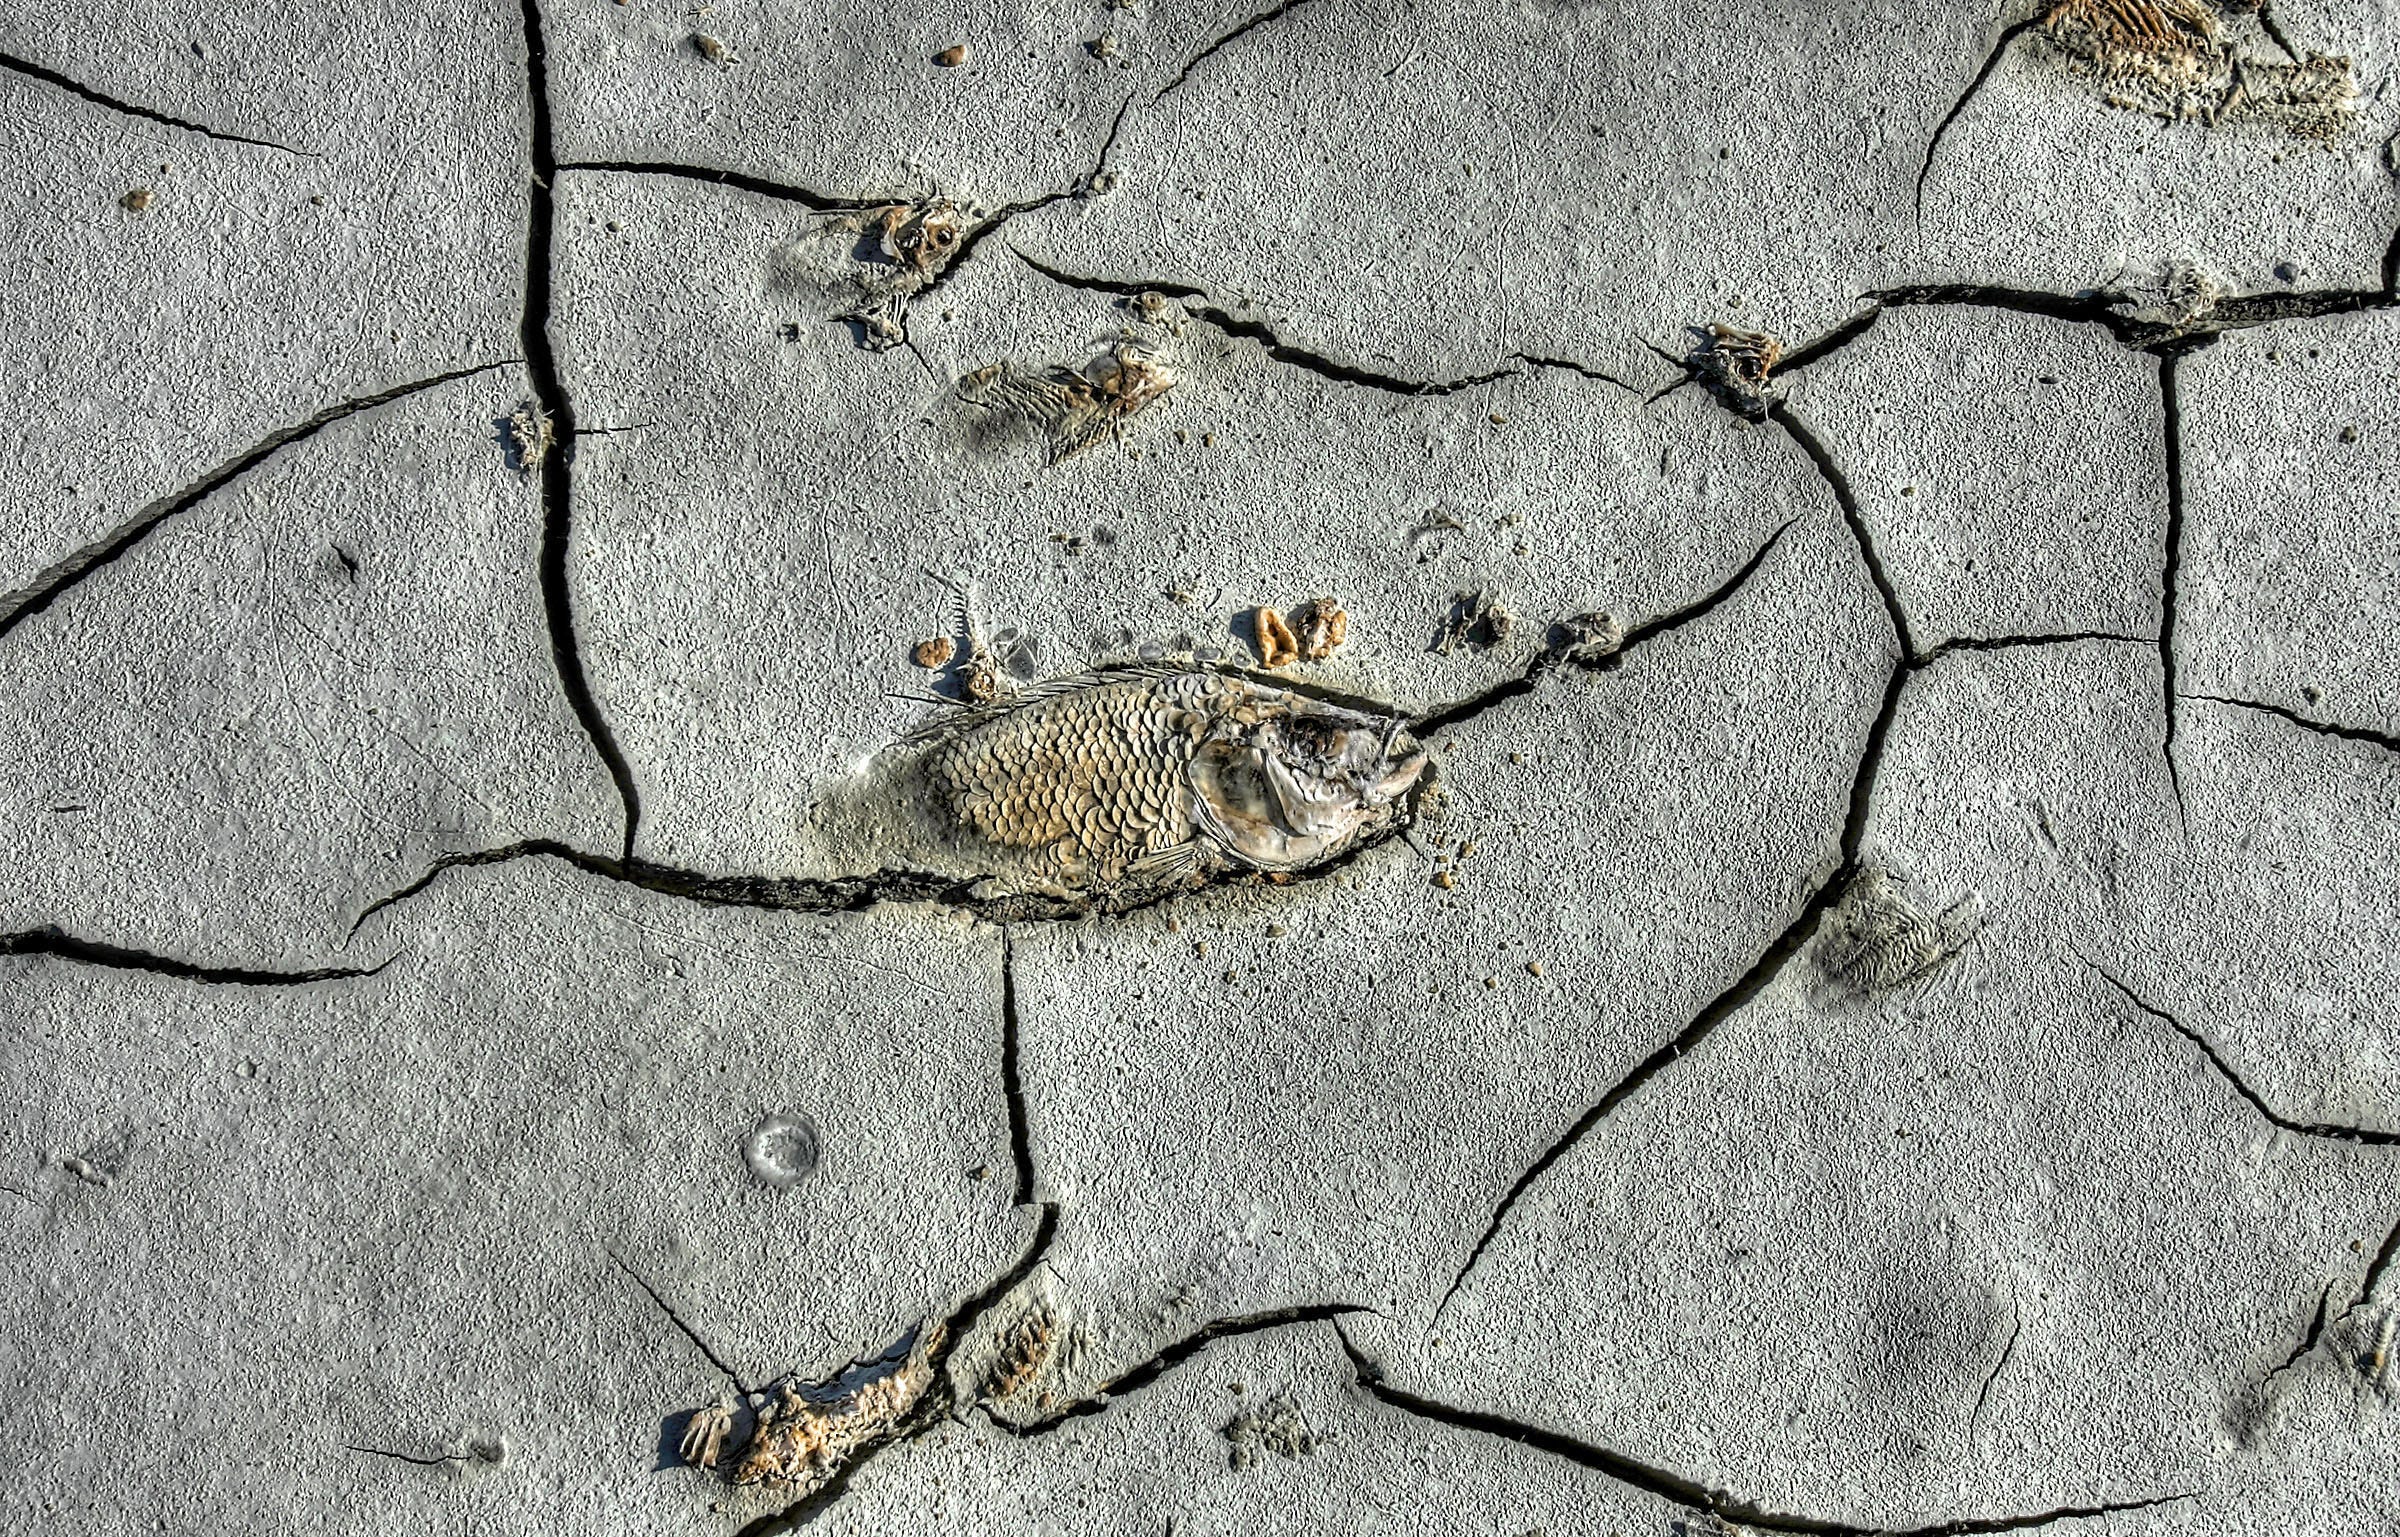 Dead fish remains have littered the shoreline at the sea for decades.  This is one from 2012.